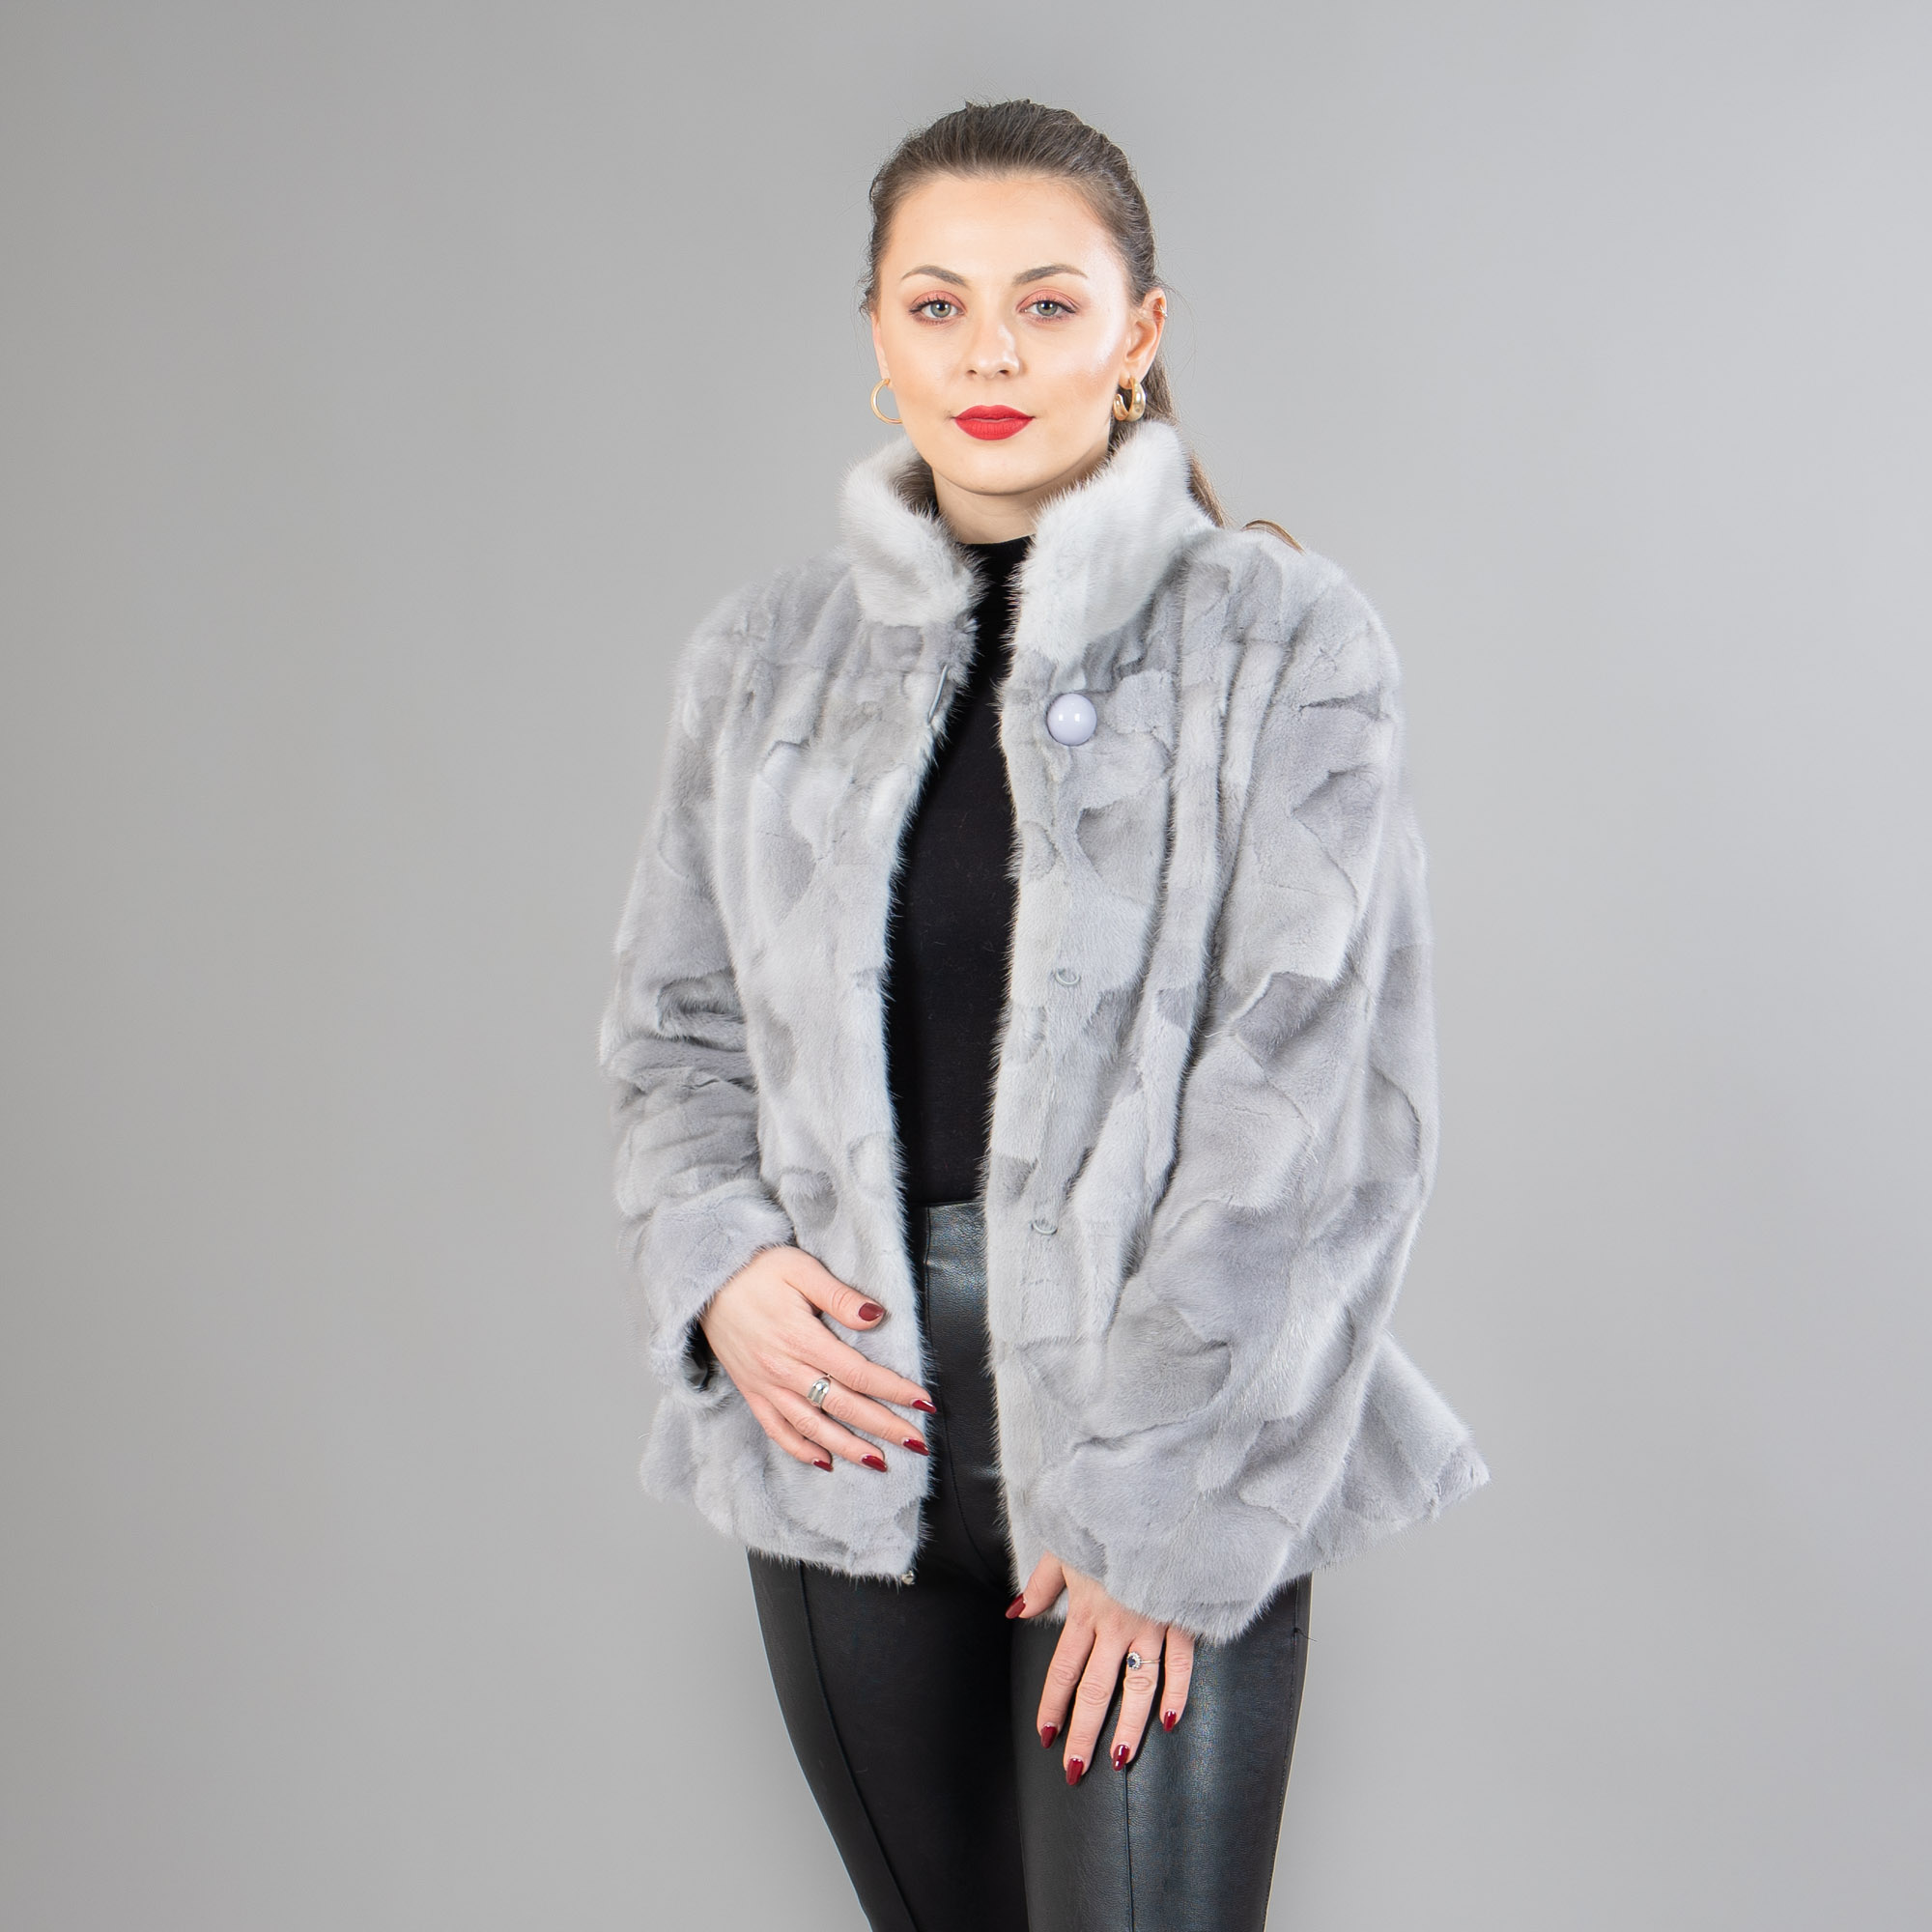 Mink fur jacket with a collar in gray color